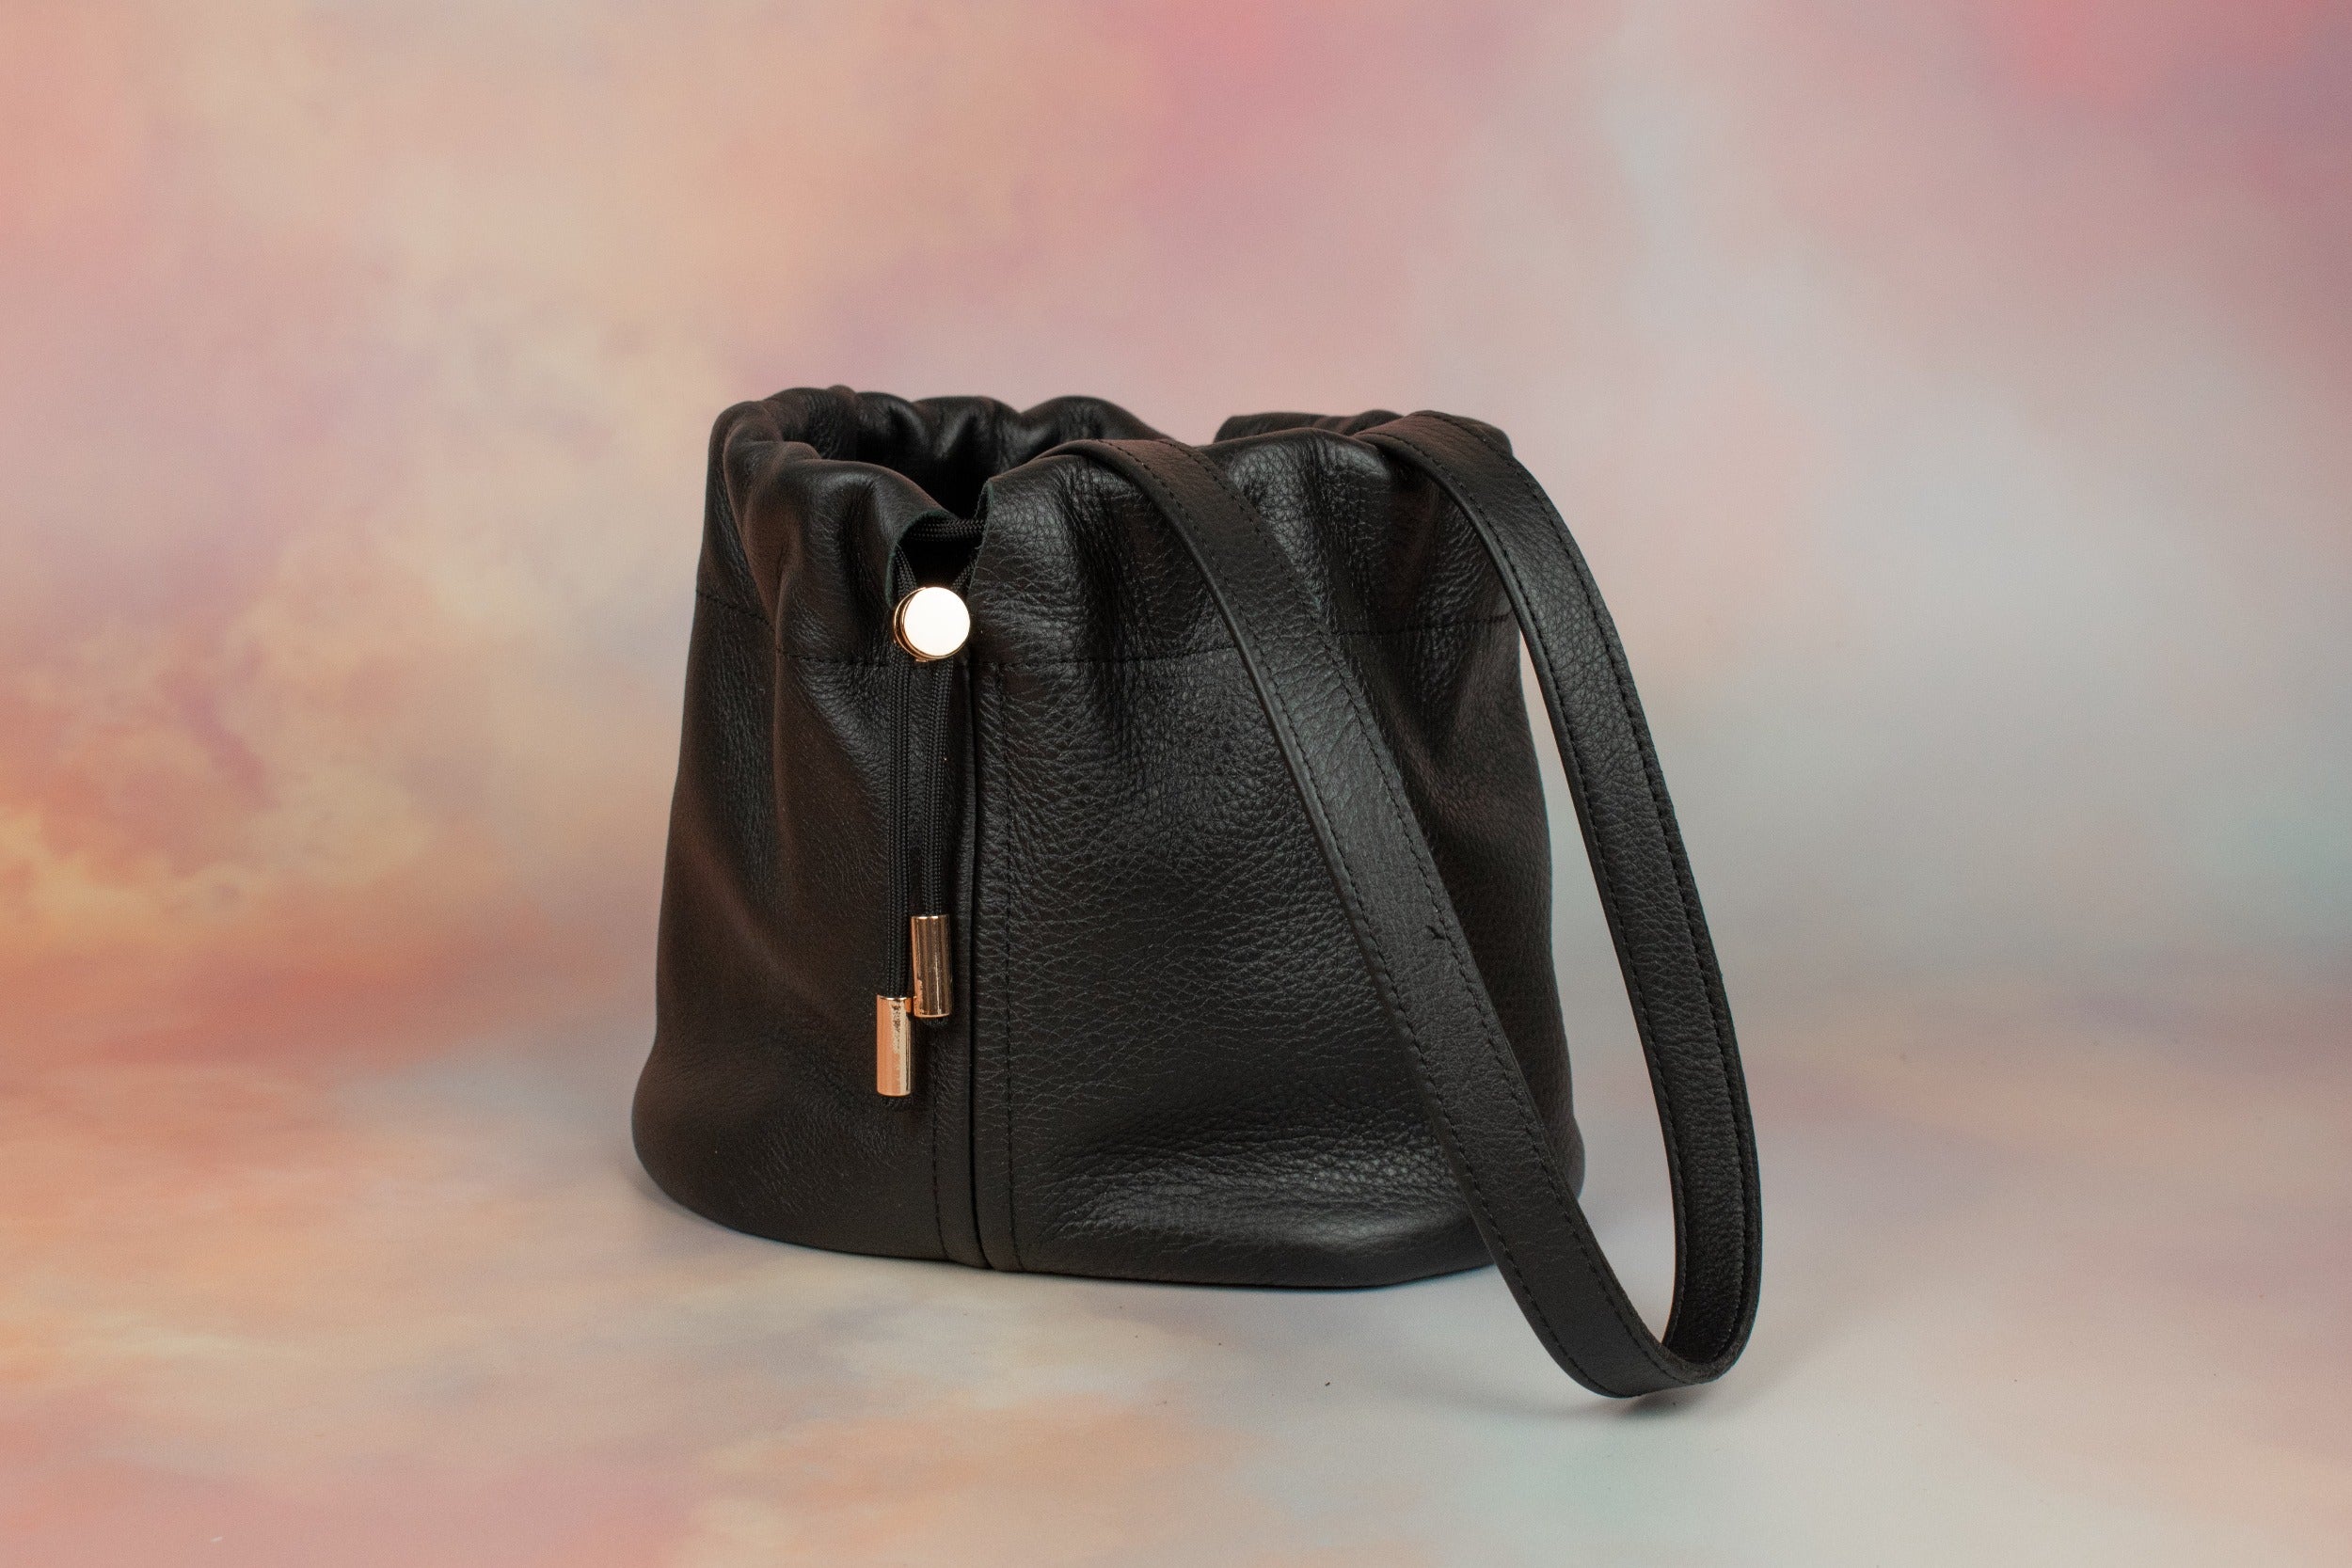 pebbled grain leather bucket bag with drawstring closure and gold hardware